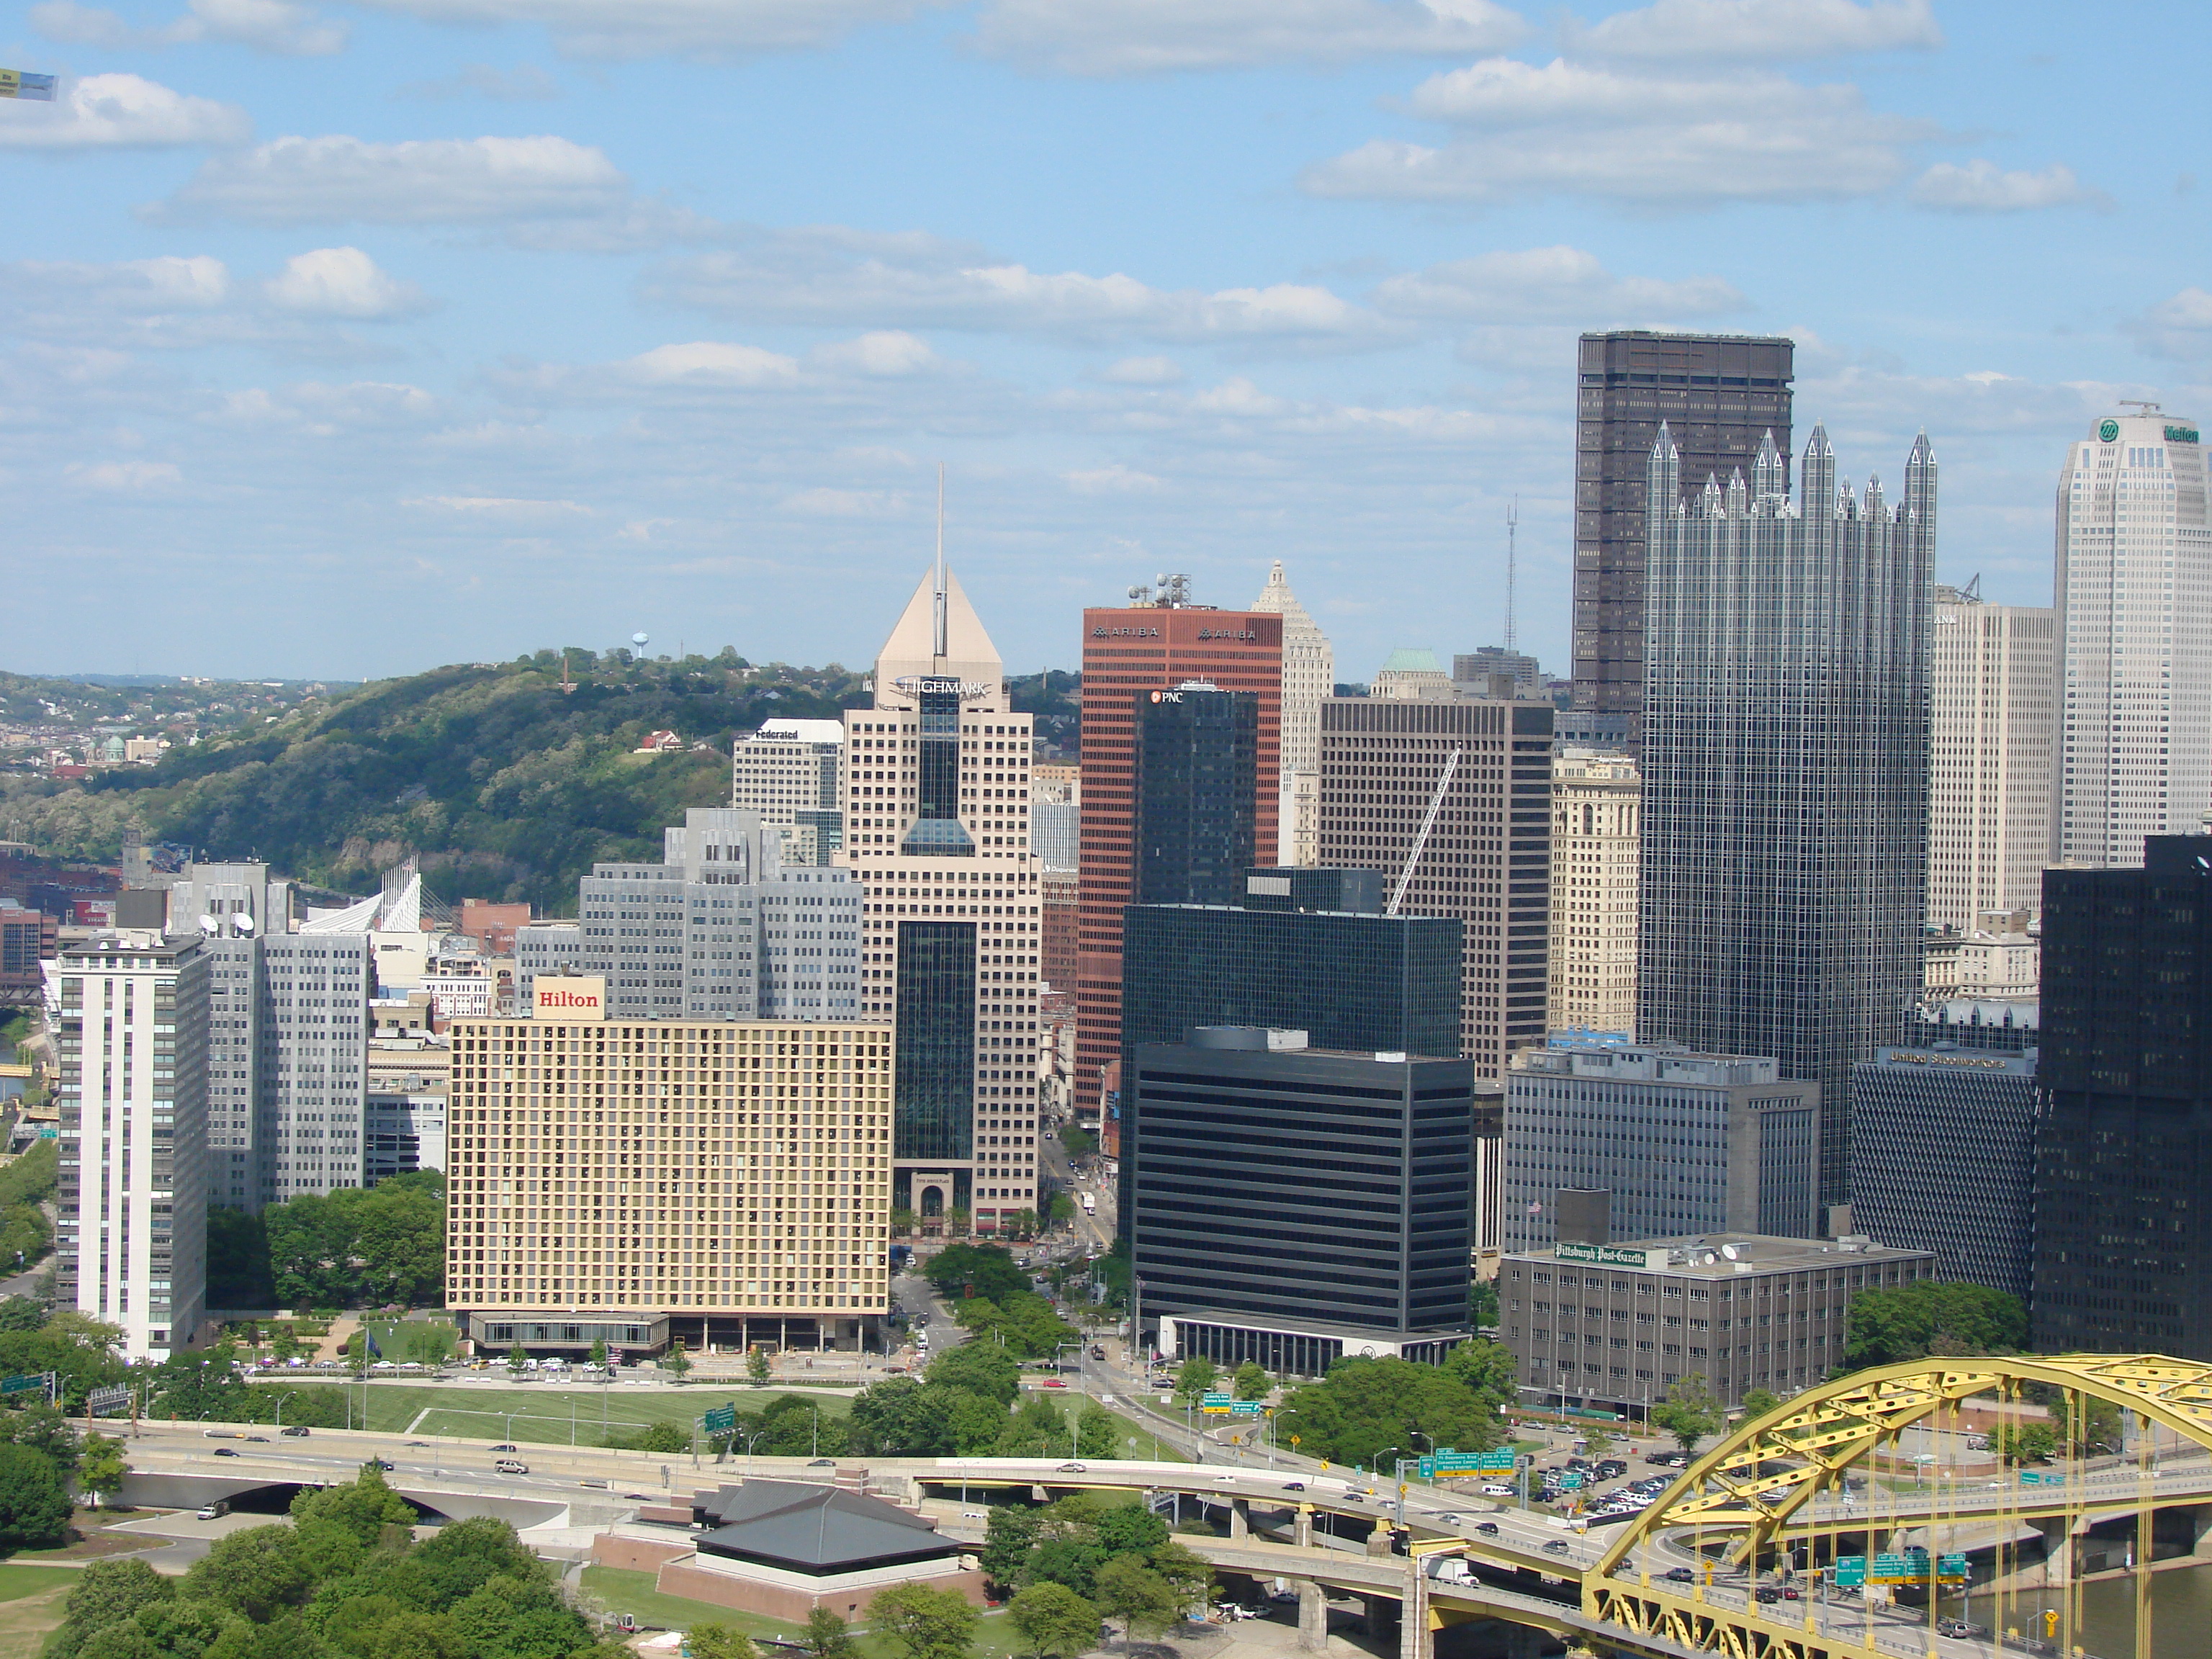 File:Downtown Pittsburgh May 2008.jpg - Wikimedia Commons